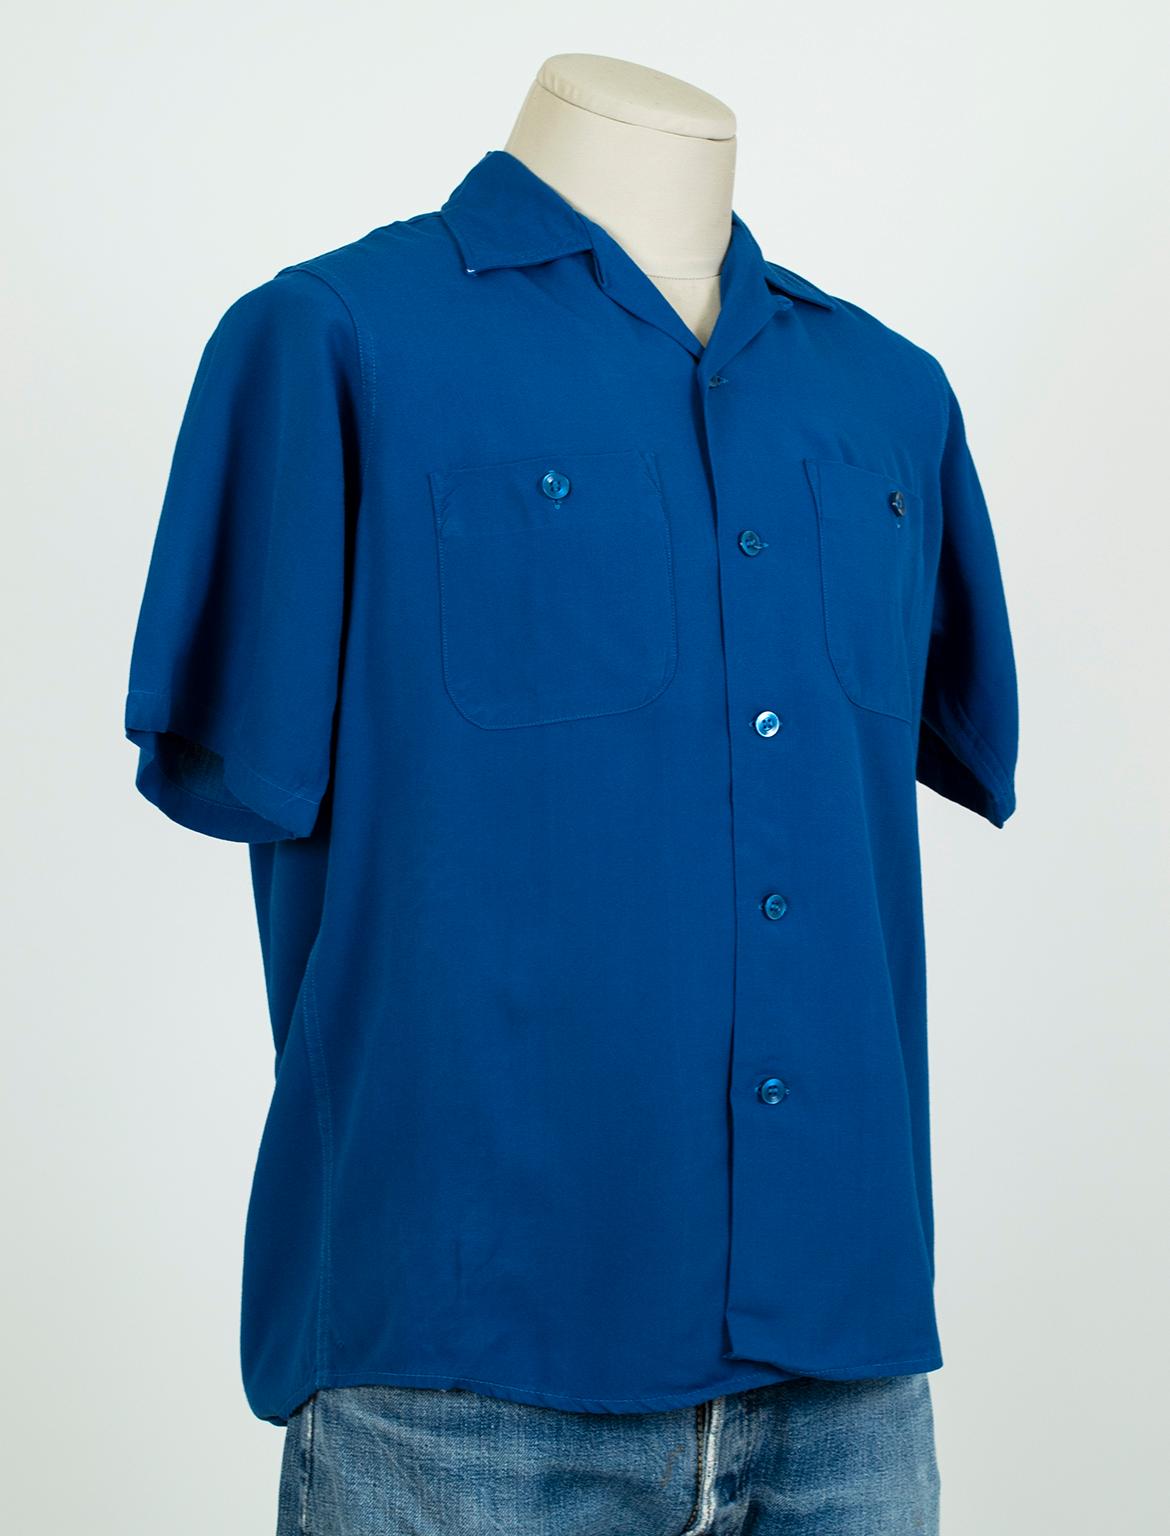 When American suburbanites embraced bowling in the 1950s, there was no more coveted label in bowling shirts than King Louie. Bright and vibrant, this “striking” blue example has been left without branding…and begs for a breast patch or league